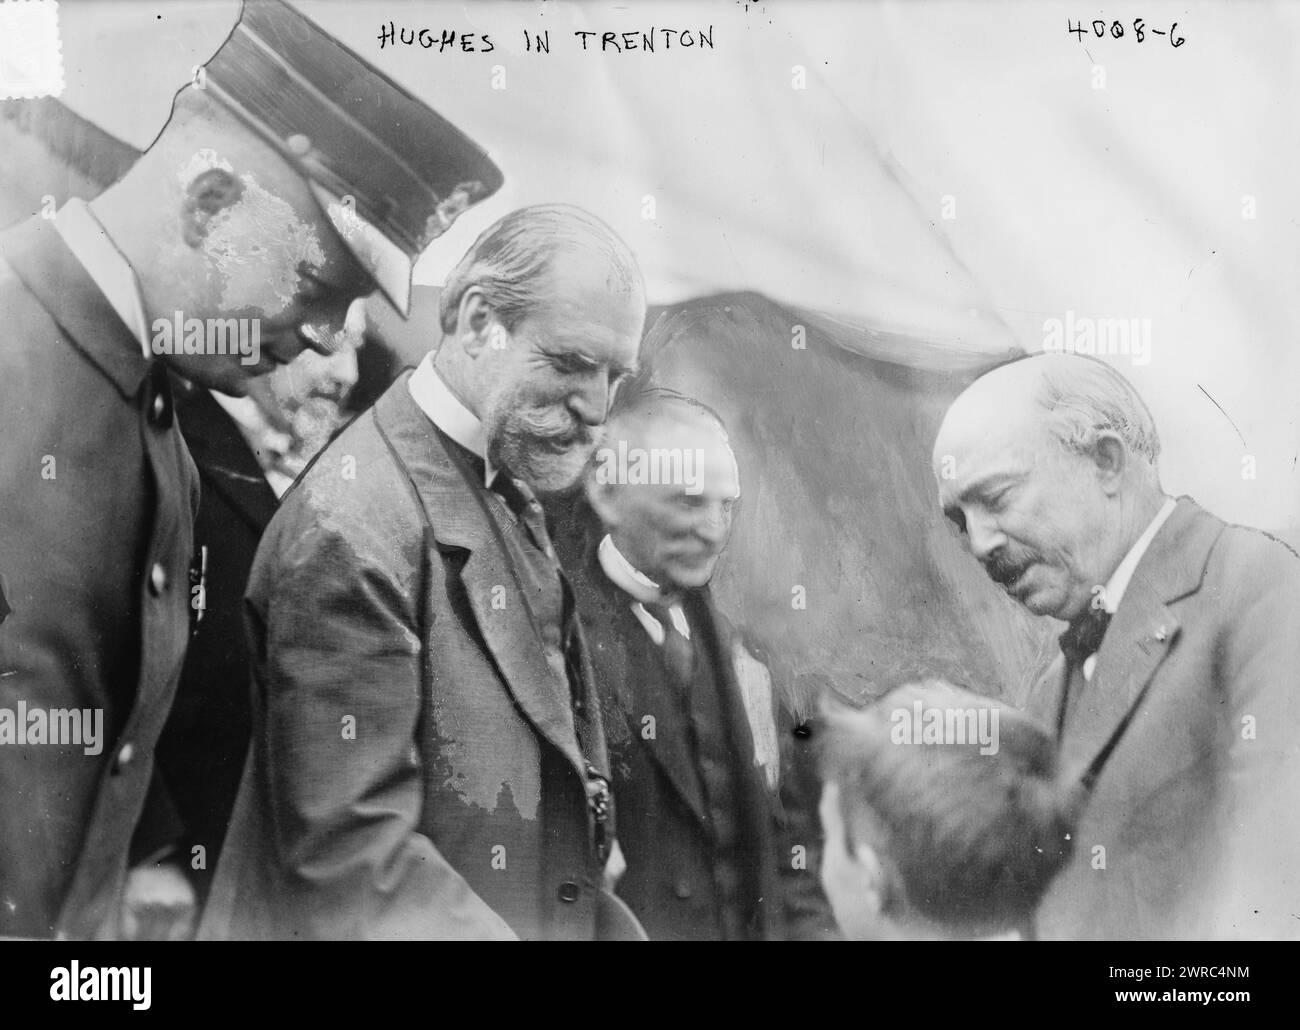 Hughes in Trenton, Photograph shows the governor of New York and Supreme Court associate justice Charles Evans Hughes, Sr. (1862-1948) in Trenton, New Jersey., between ca. 1915 and ca. 1920, Glass negatives, 1 negative: glass Stock Photo